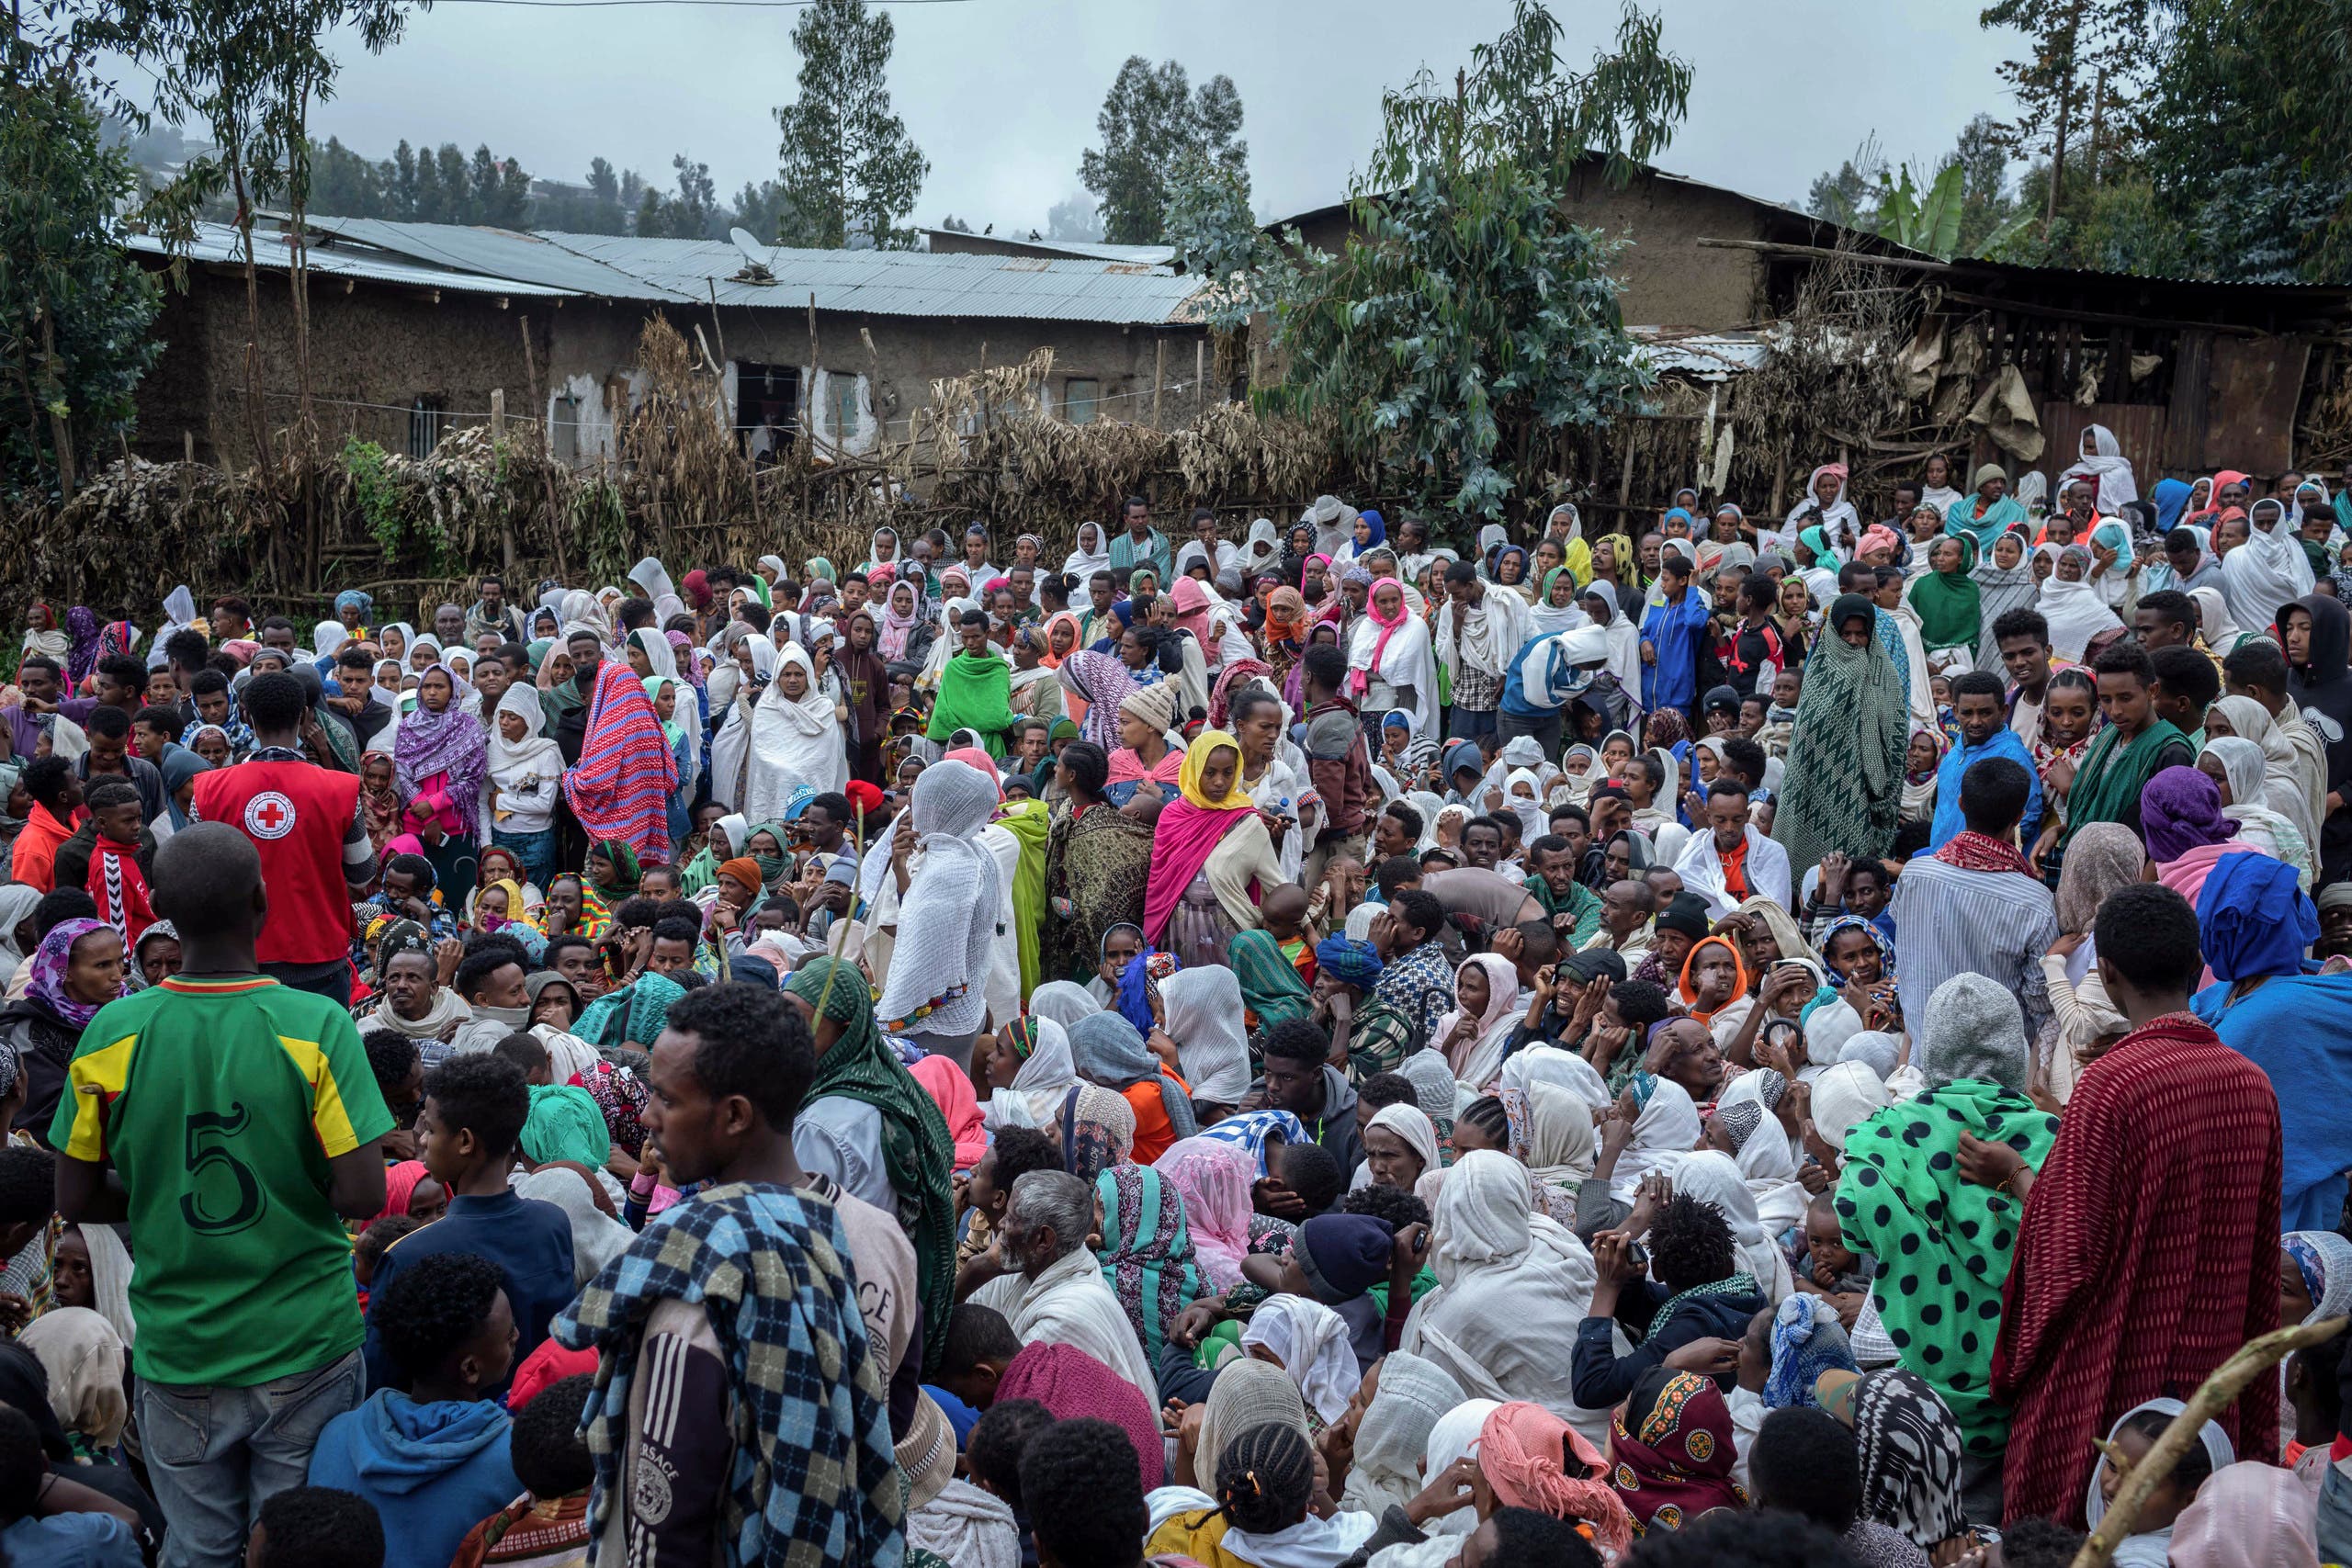 Displaced Ethiopians from different towns in the Amhara region wait for aid distributions at a center for the internally-displaced in Debark, in the Amhara region of northern Ethiopia Friday, Aug. 27, 2021. (AP)